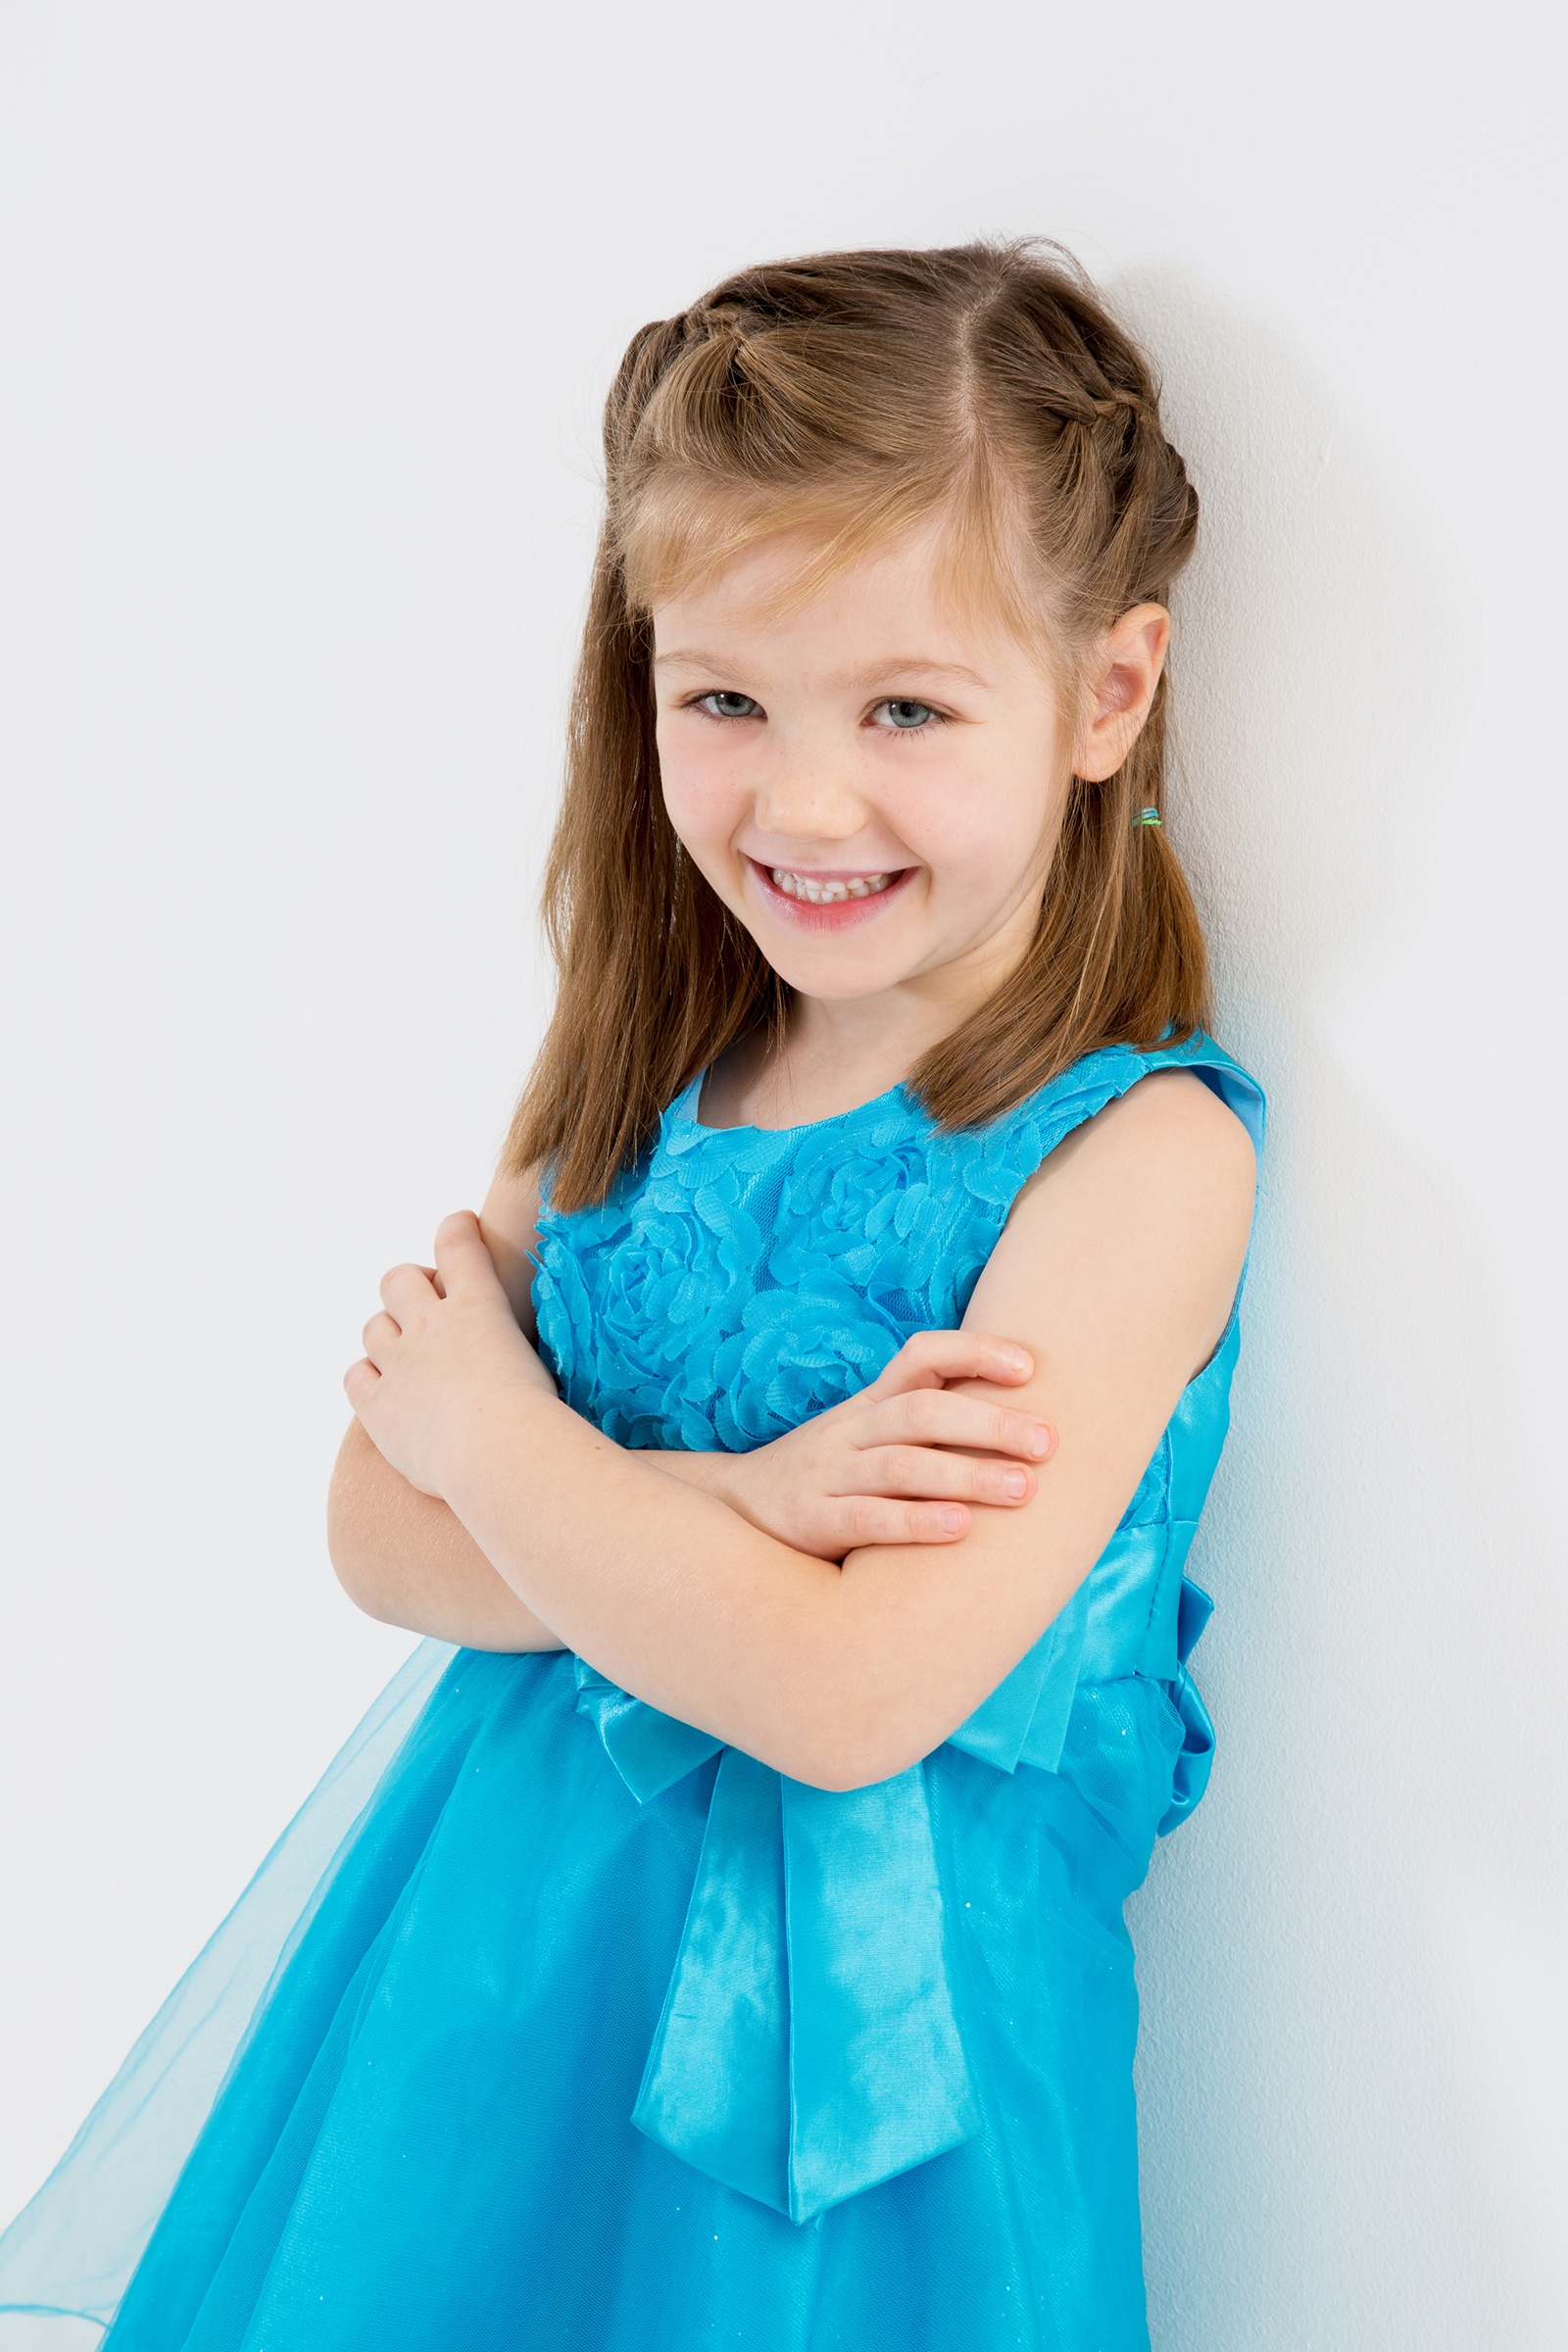 Register to Win a Child Portrait Experience 20